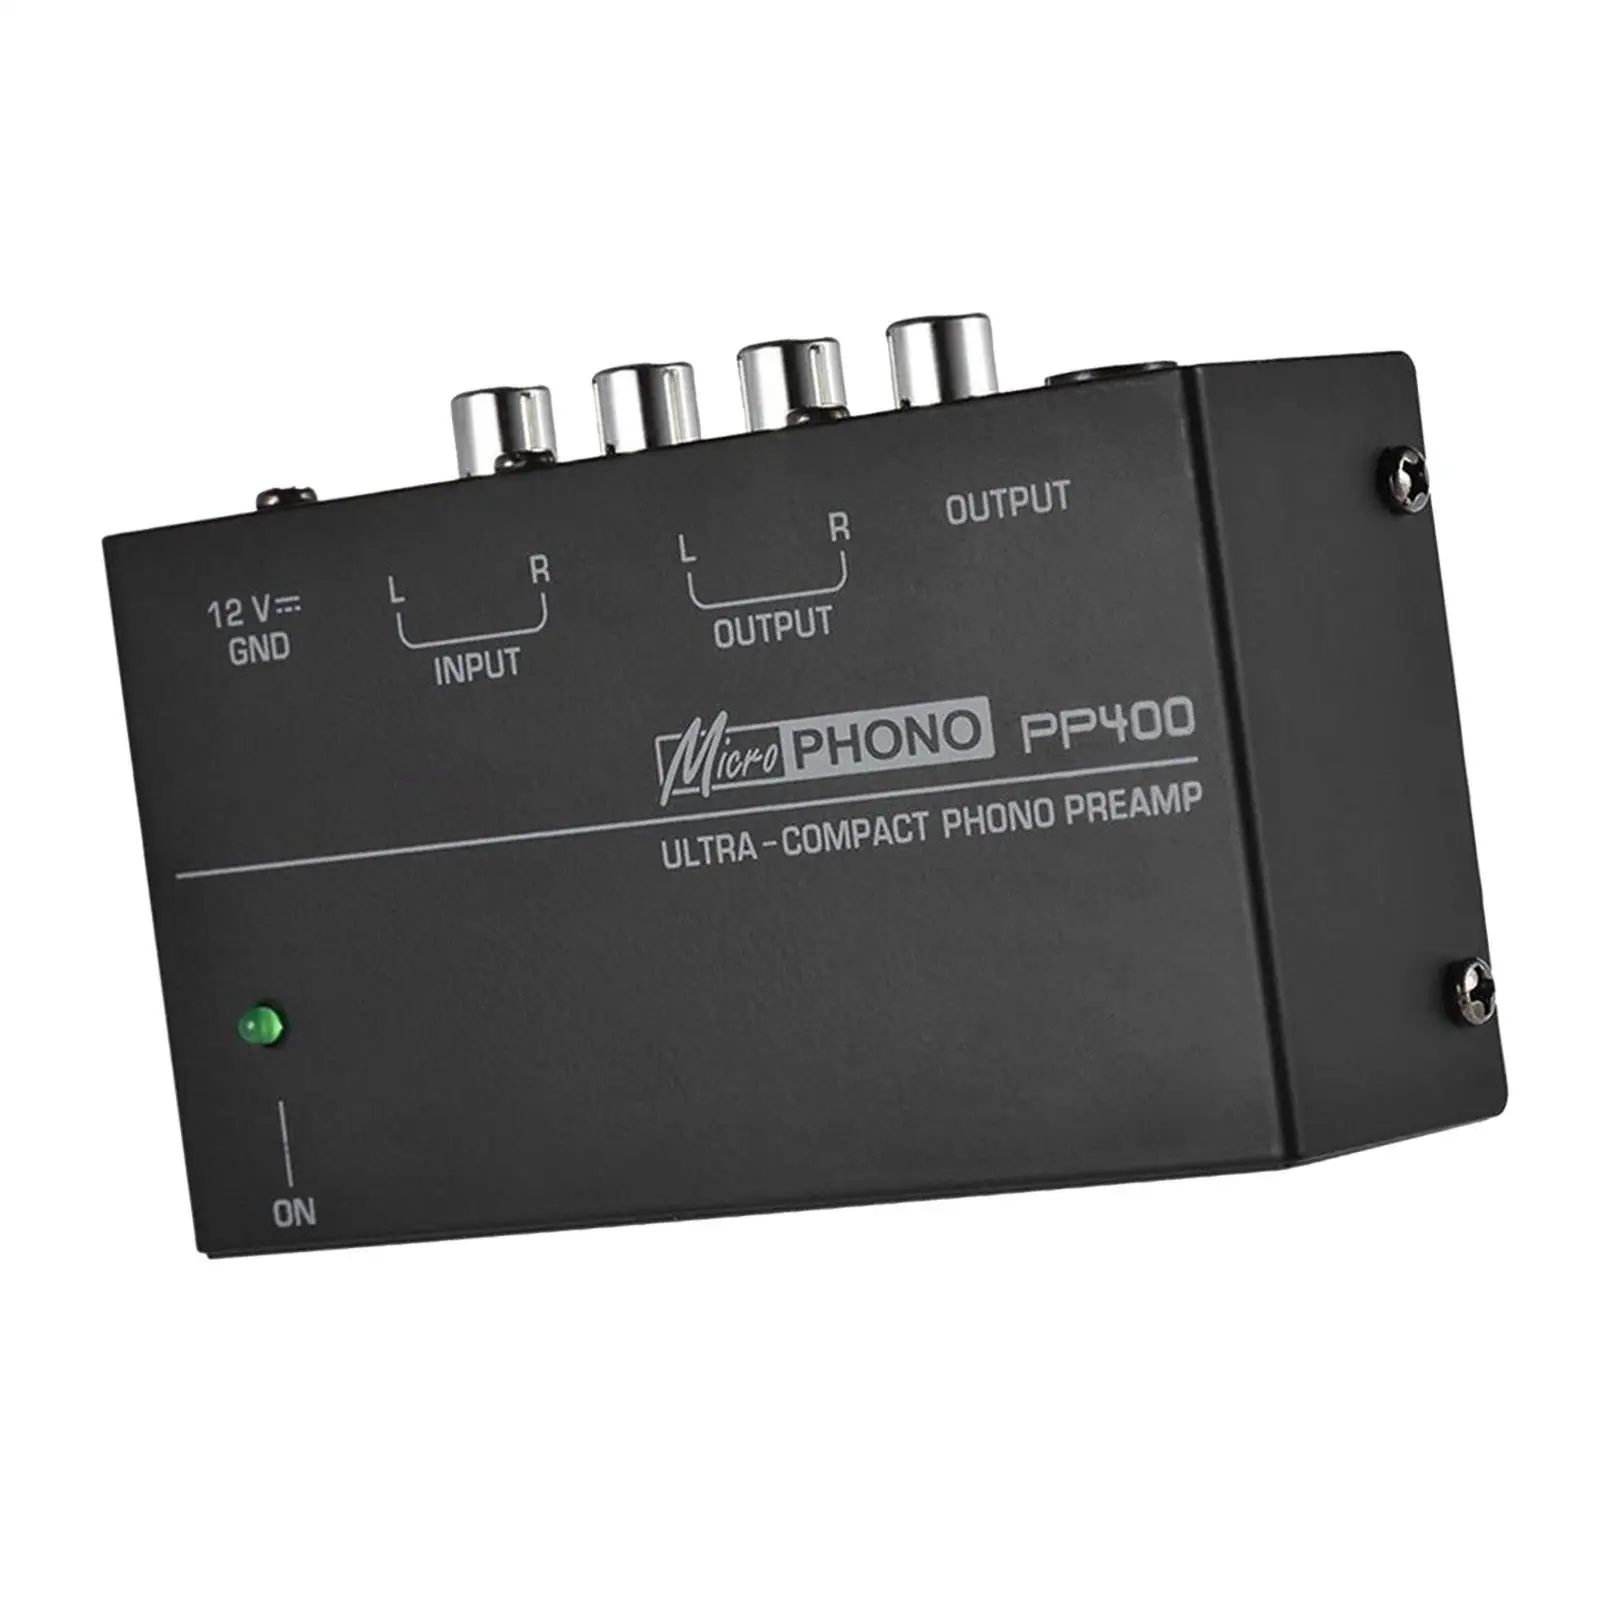 Turntable Amplifier Preamp Turntable Preamplifier Low Noise 12V Adapter Phono Turntable Preamp for Speakers Amplifiers Computers